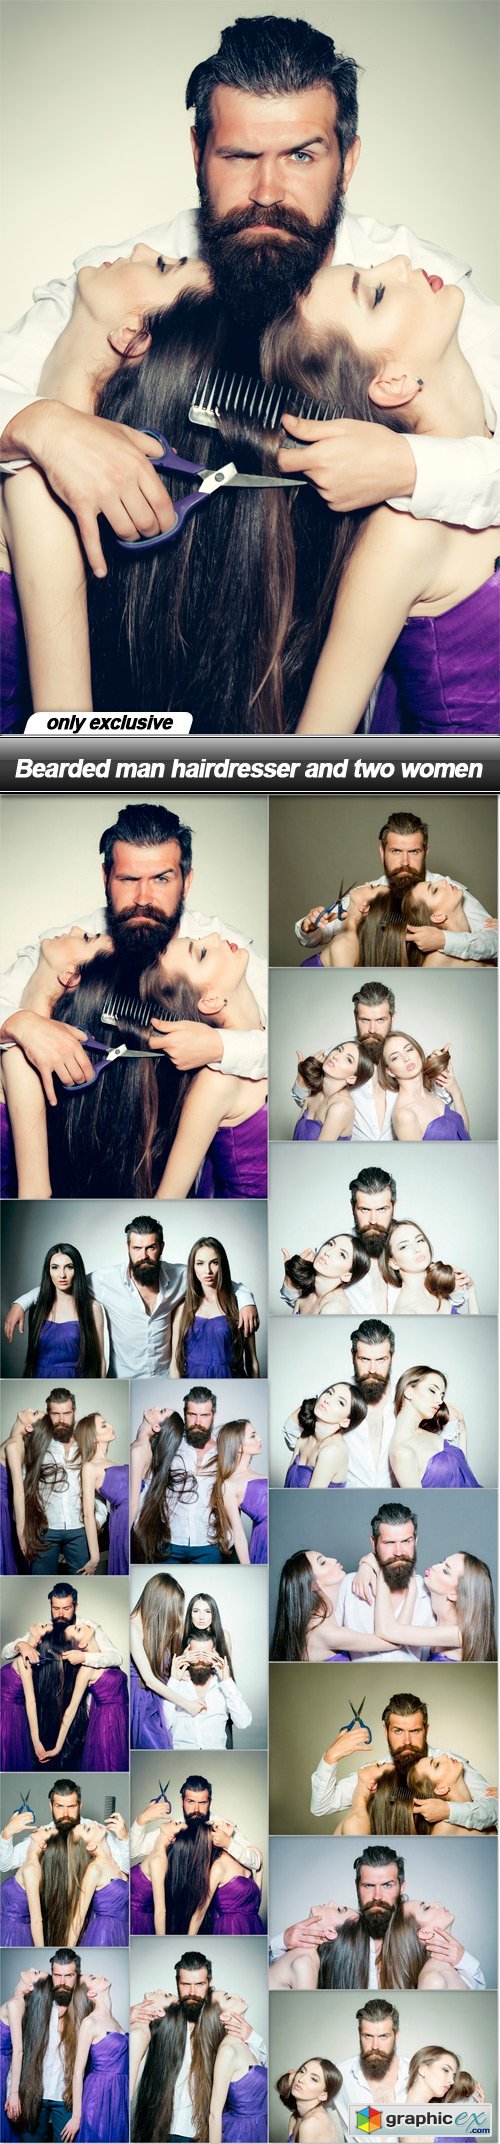 Bearded man hairdresser and two women - 18 UHQ JPEG